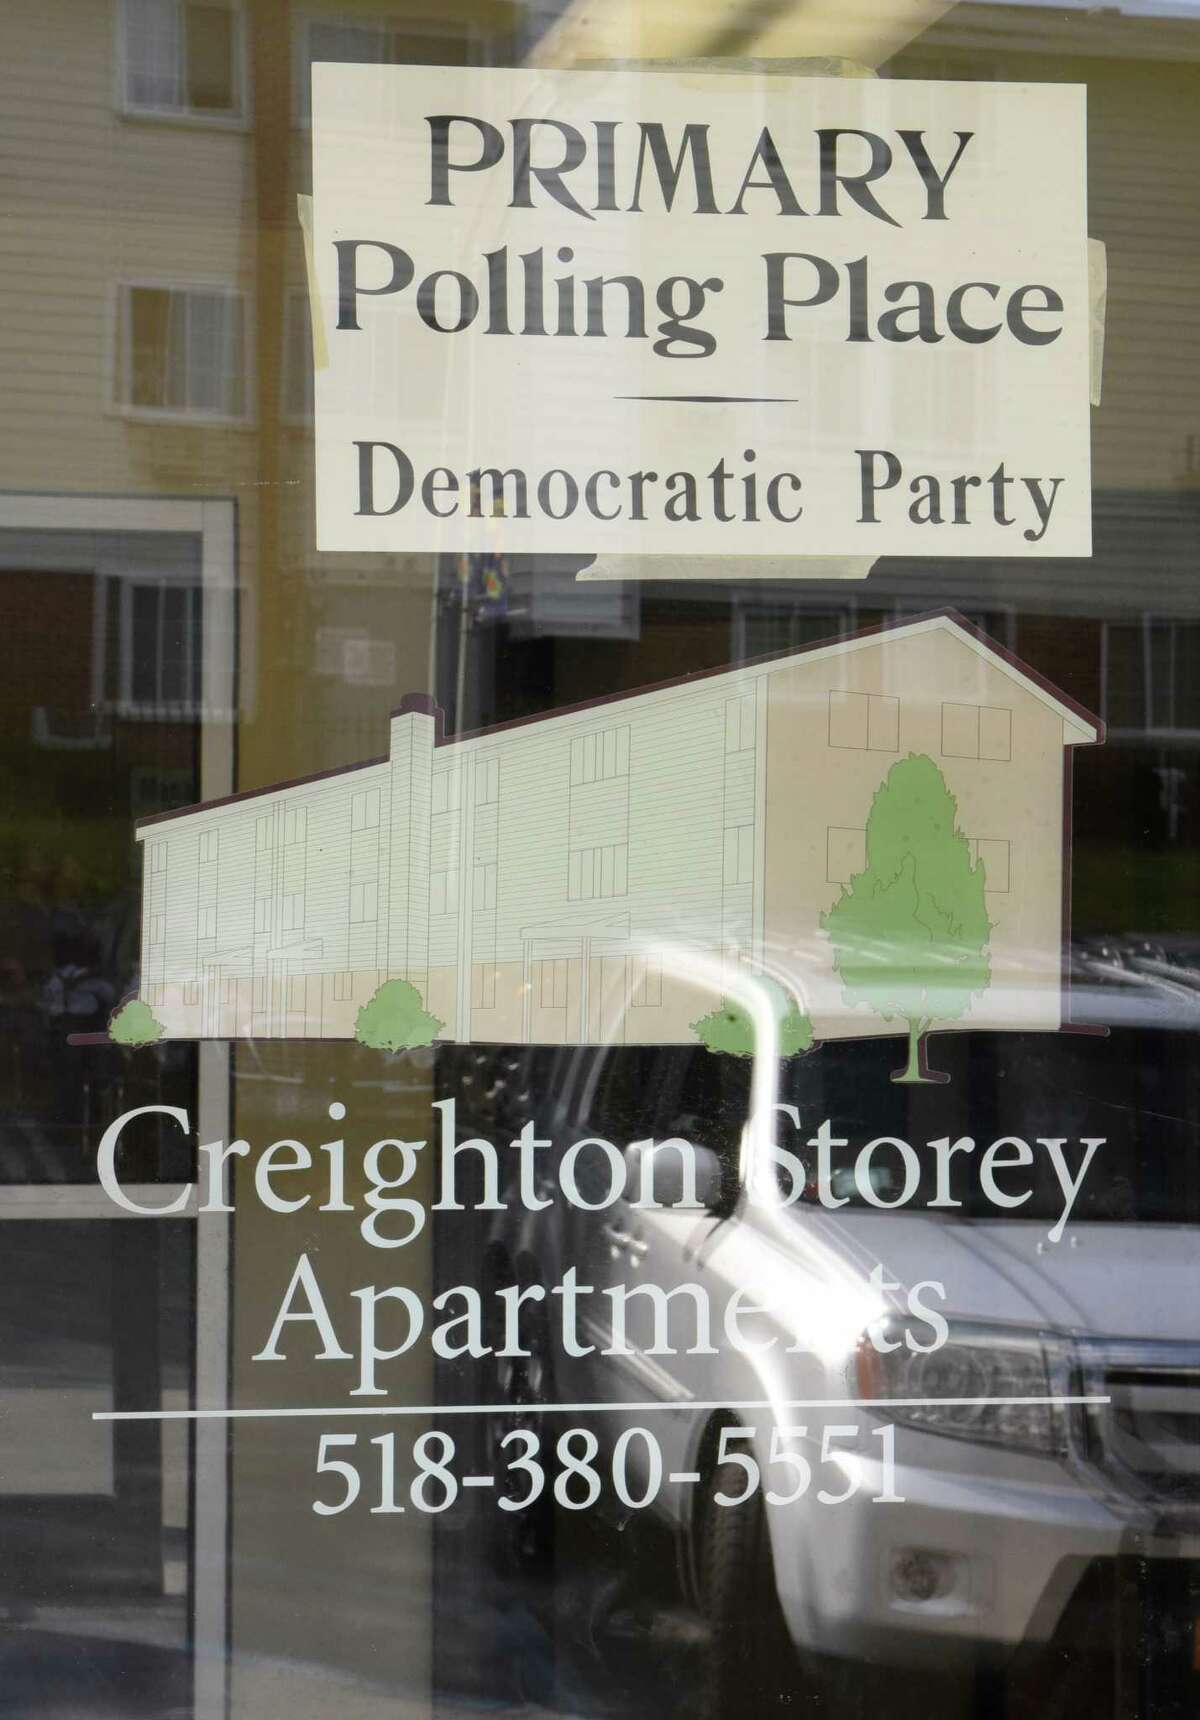 A sign for the primary polling place Democratic Party is seen in a window at the Creighton Storey Homes on Tuesday June 25, 2019 in Albany, N.Y. (Lori Van Buren/Times Union)